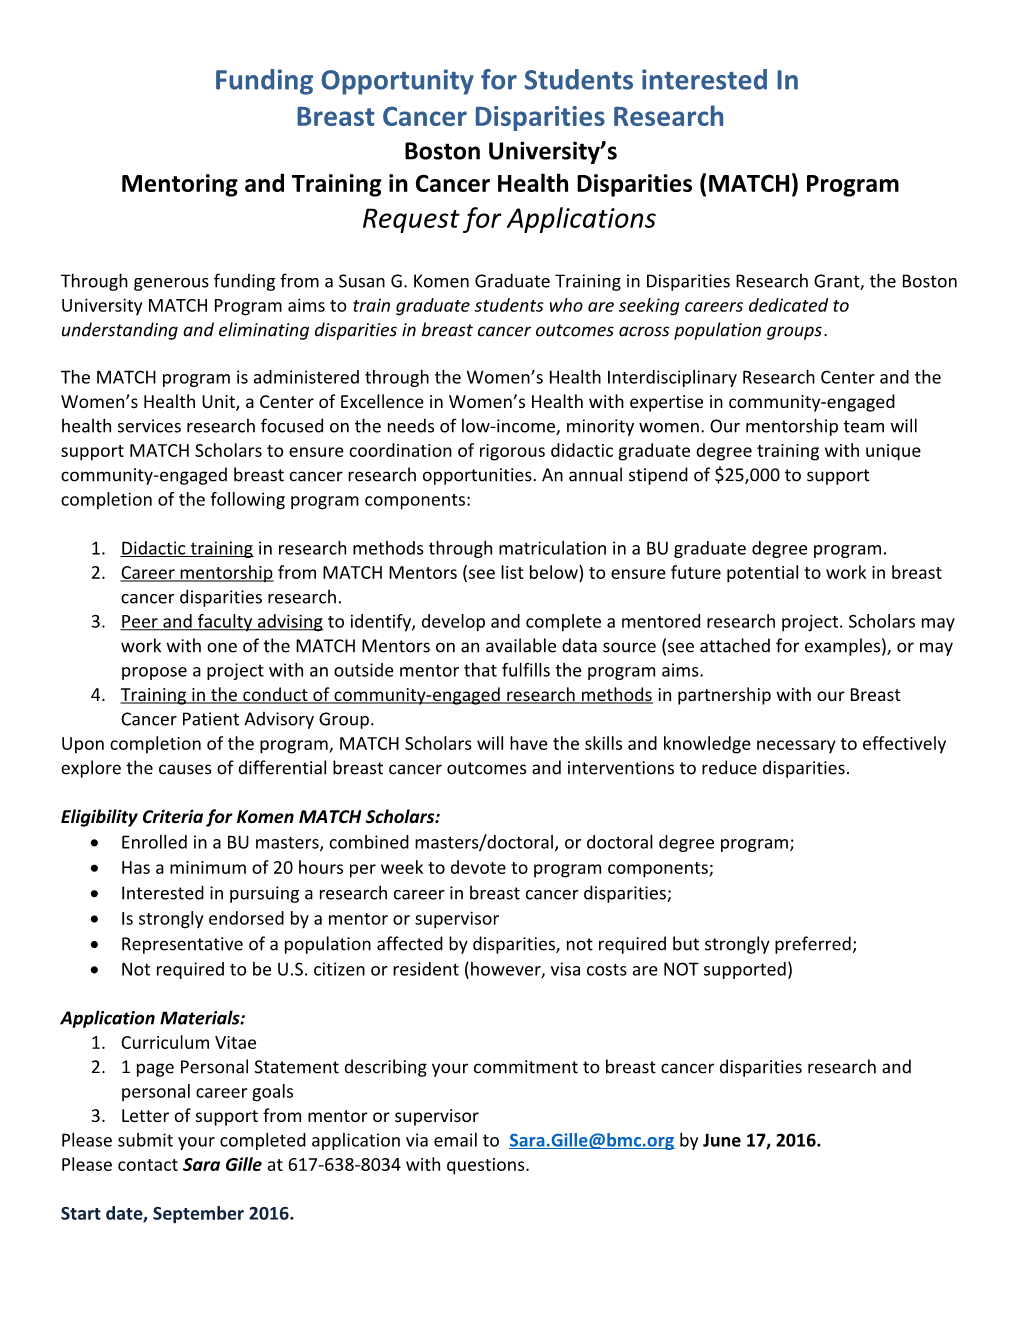 Mentoring and Training in Cancer Health Disparities (MATCH) Program